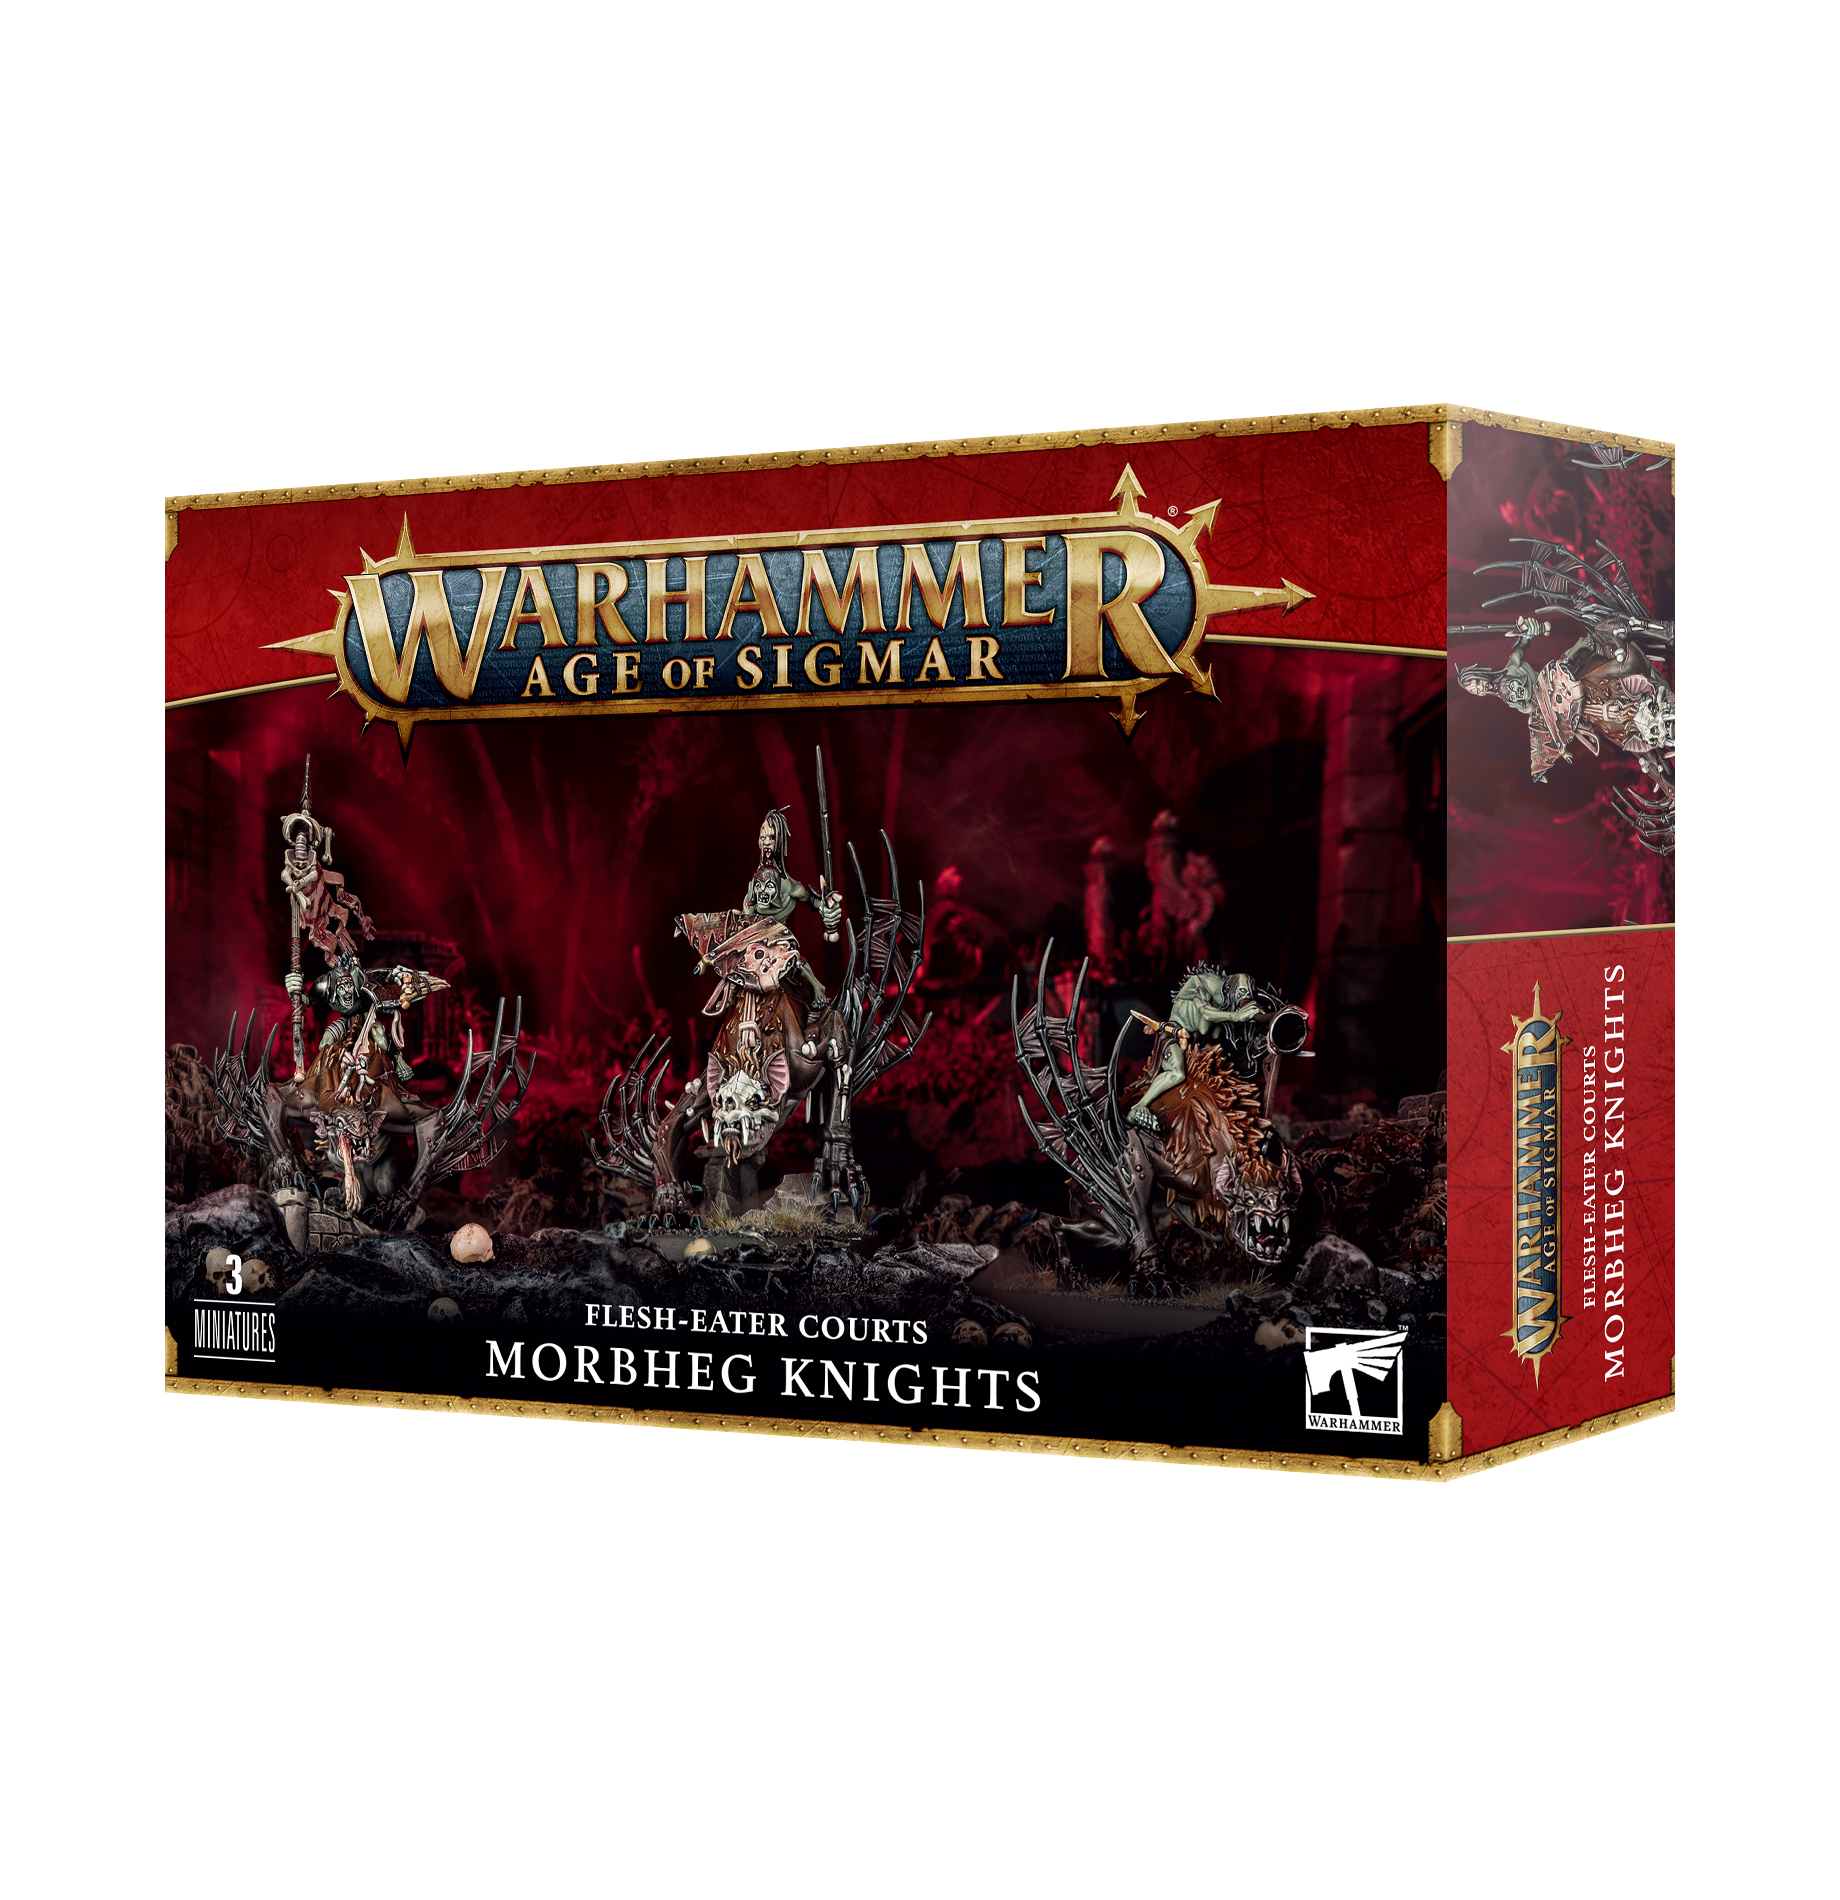 Warhammer Age of Sigmar: Flesh-Eater Courts: Morbheg Knights 